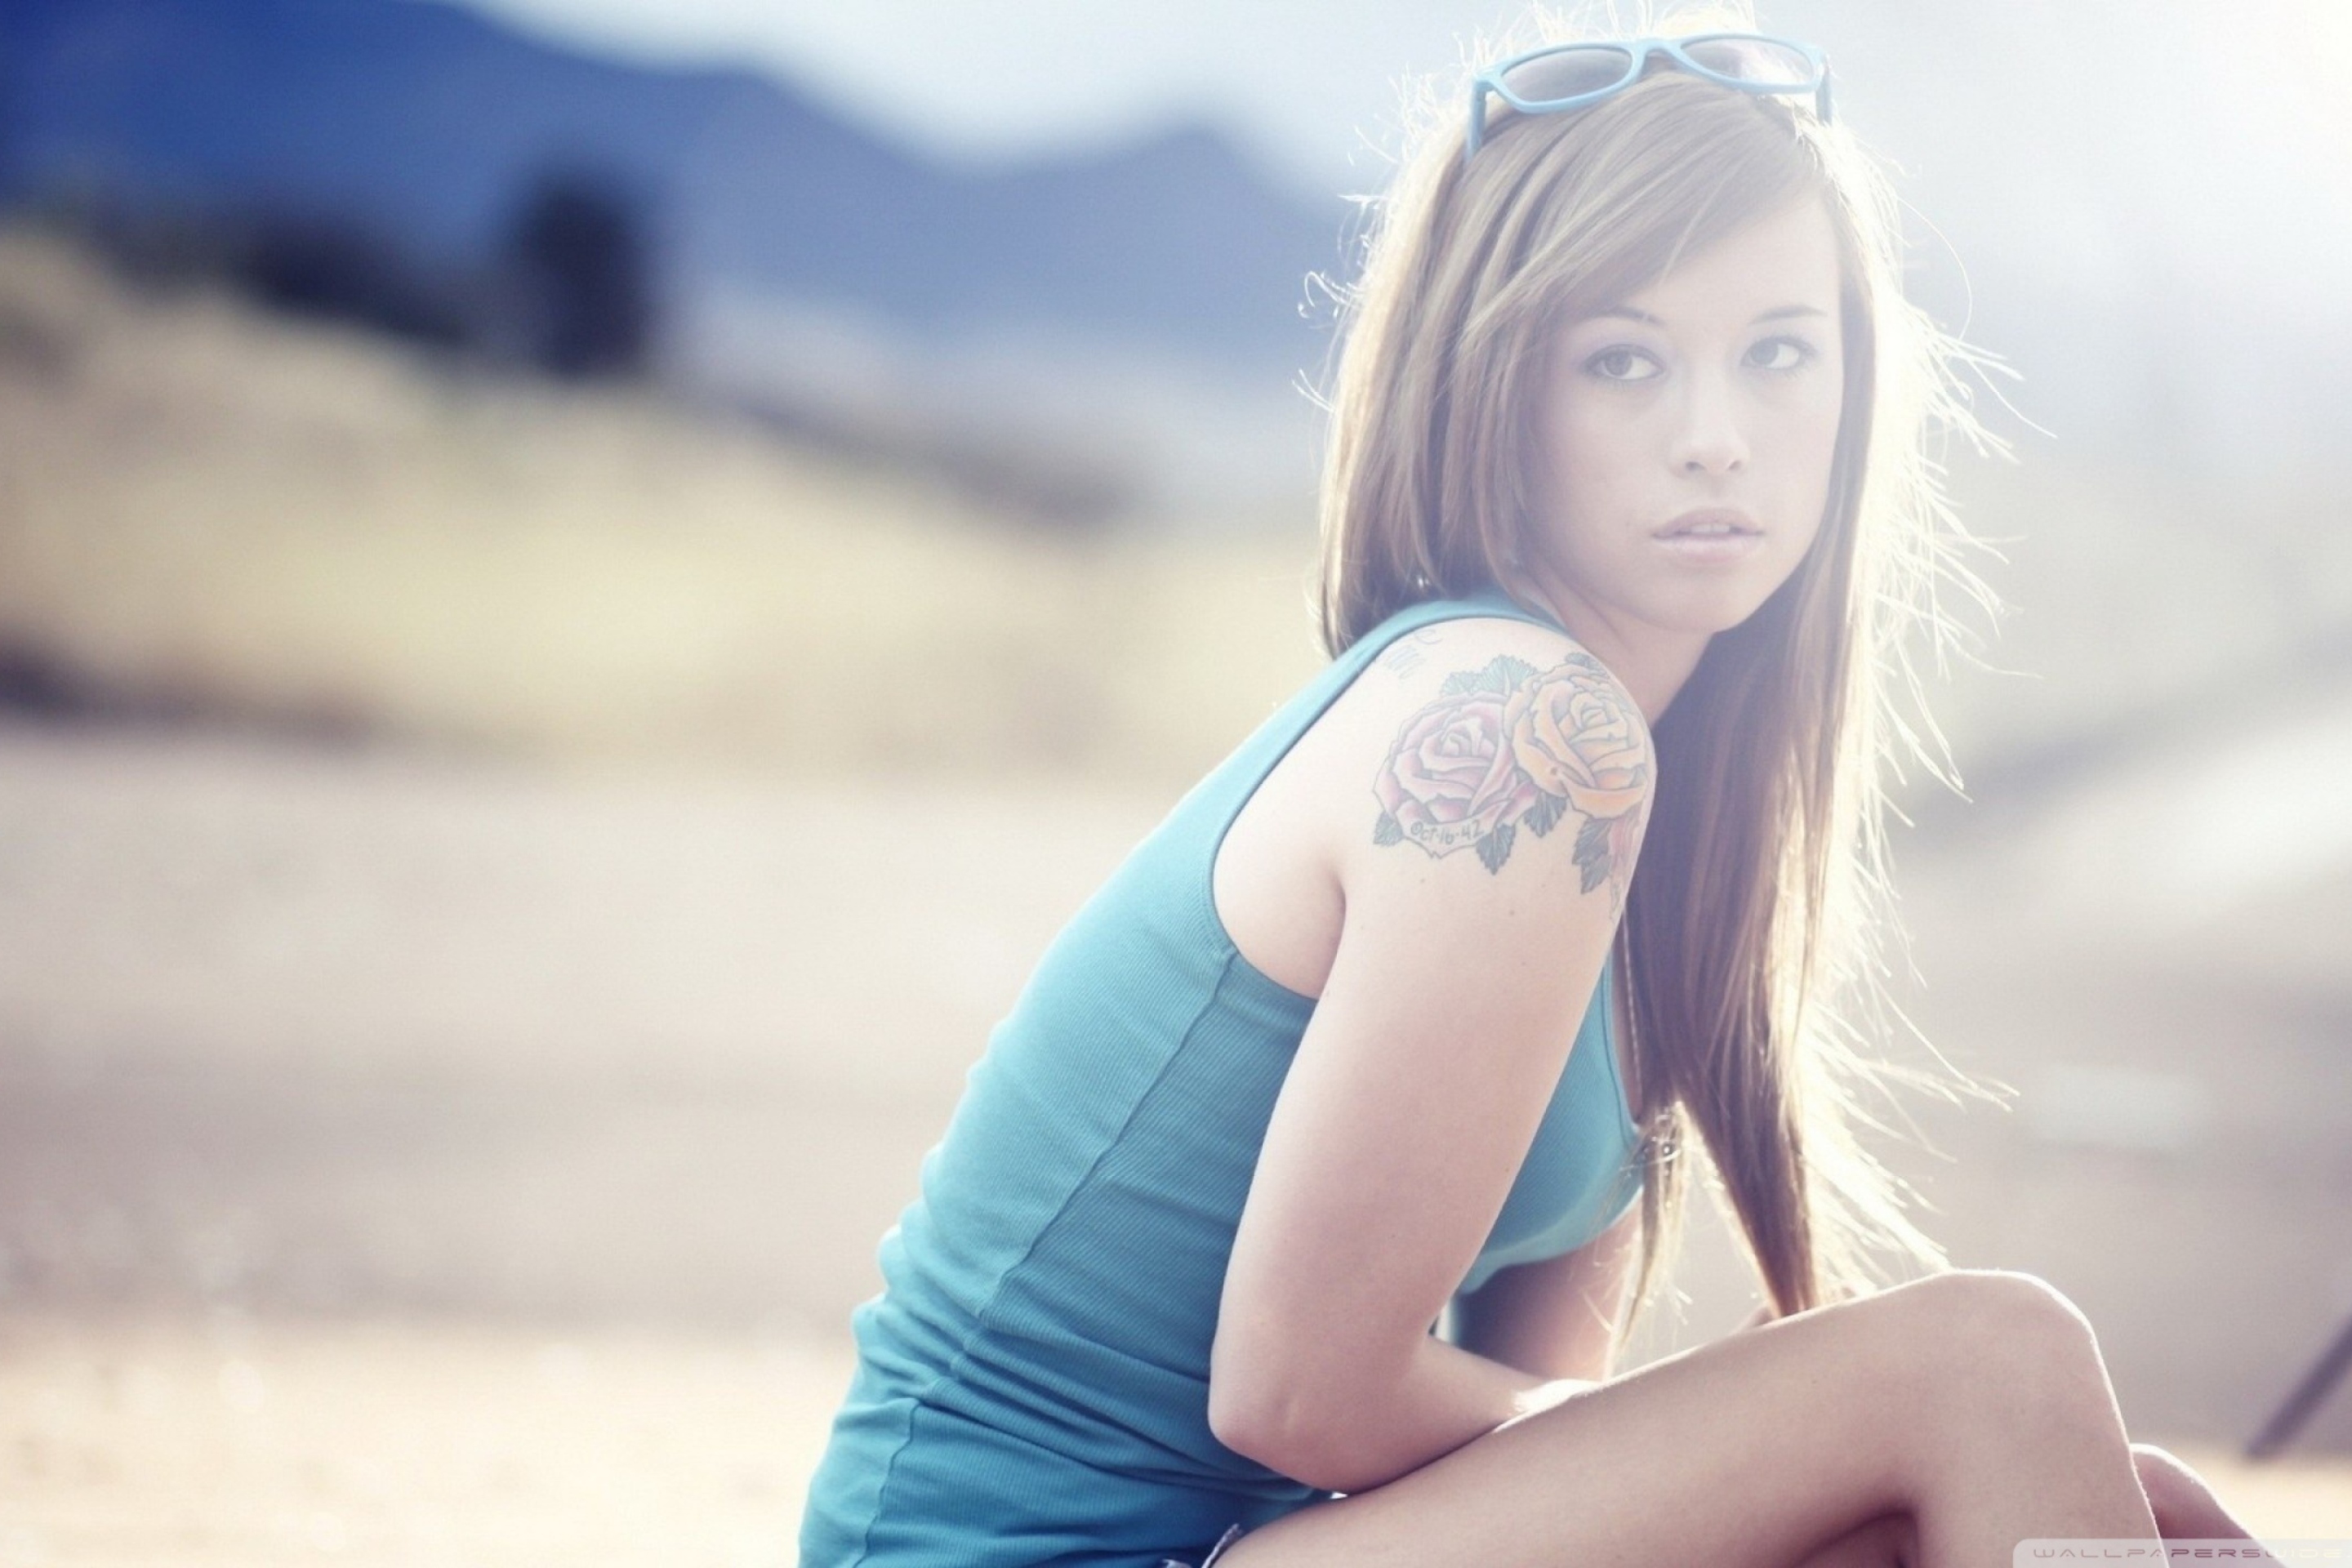 Das Beautiful Girl With Long Blonde Hair And Rose Tattoo Wallpaper 2880x1920